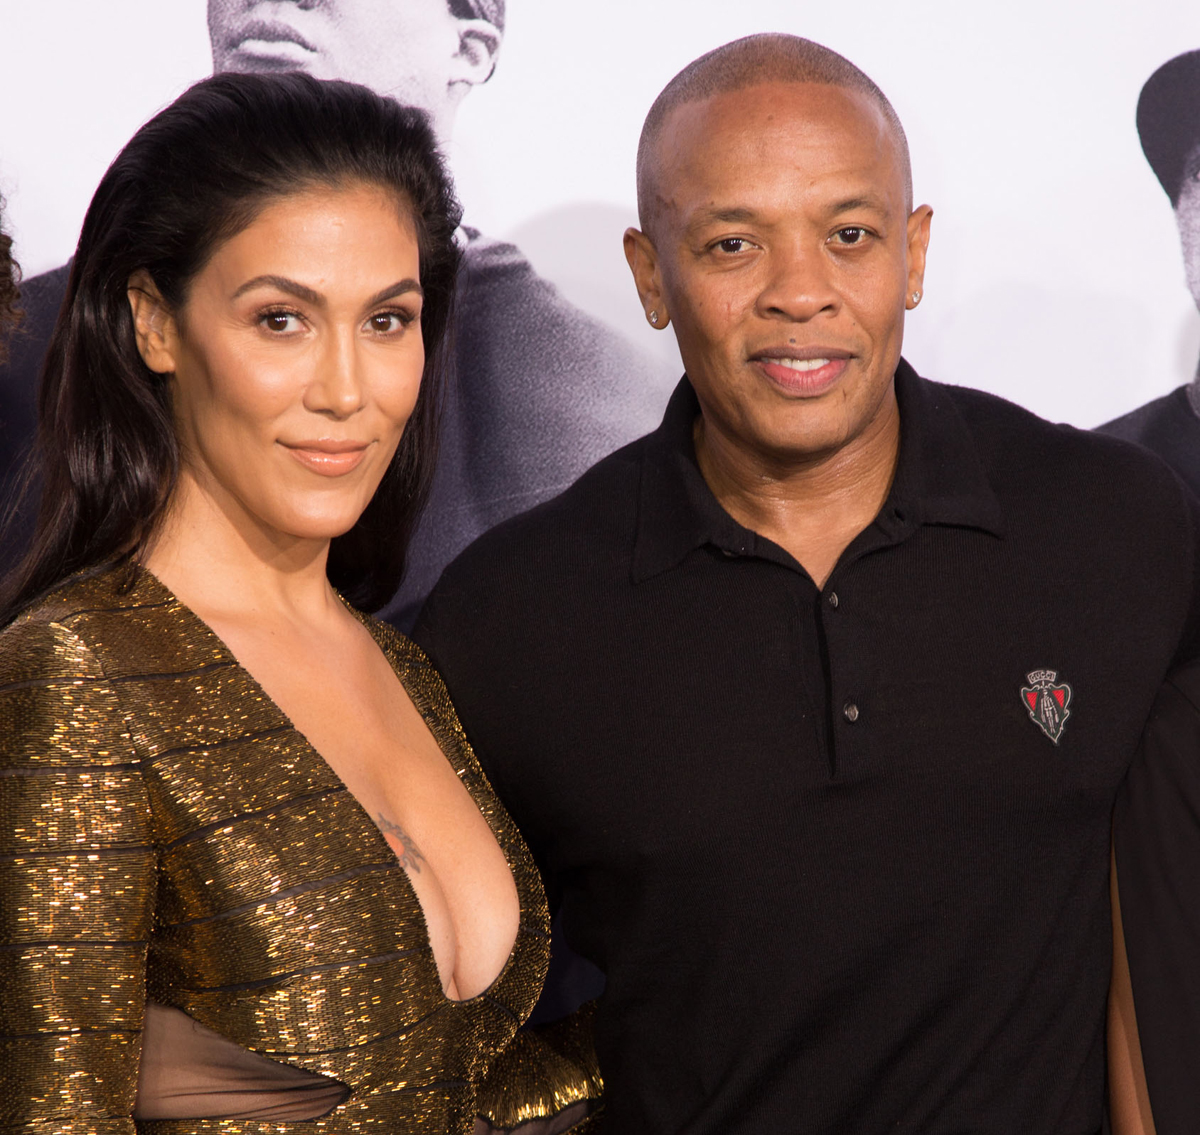 What You Don't Know About Dr. Dre's Wife, Nicole Young